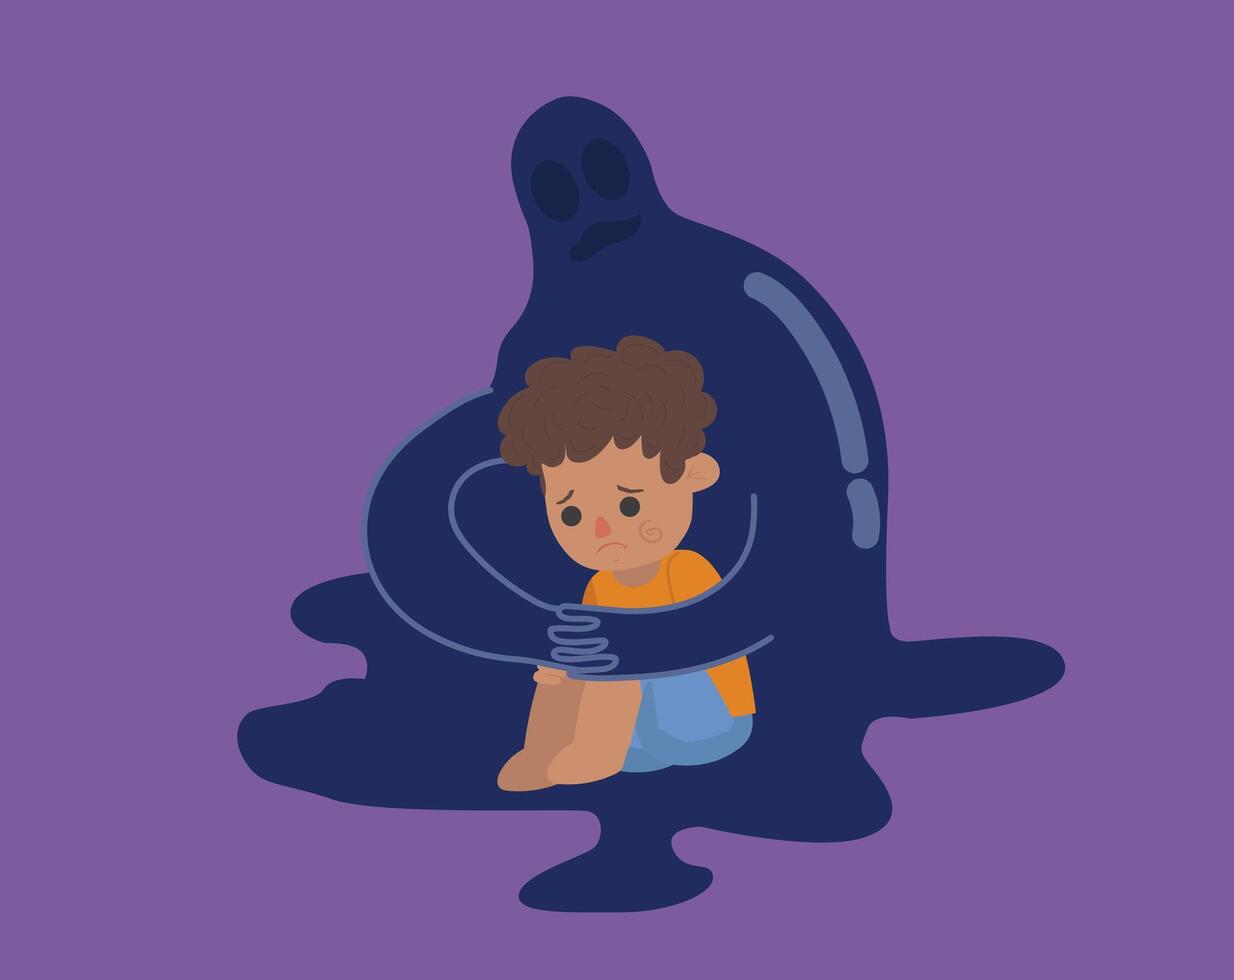 The little boy tripped in depression, the kid sitting in the flour sad, Insecurity, and bullying children. Sad boy. Flat design. Bullying and harassment of children. Abstract flat illustration. Vector